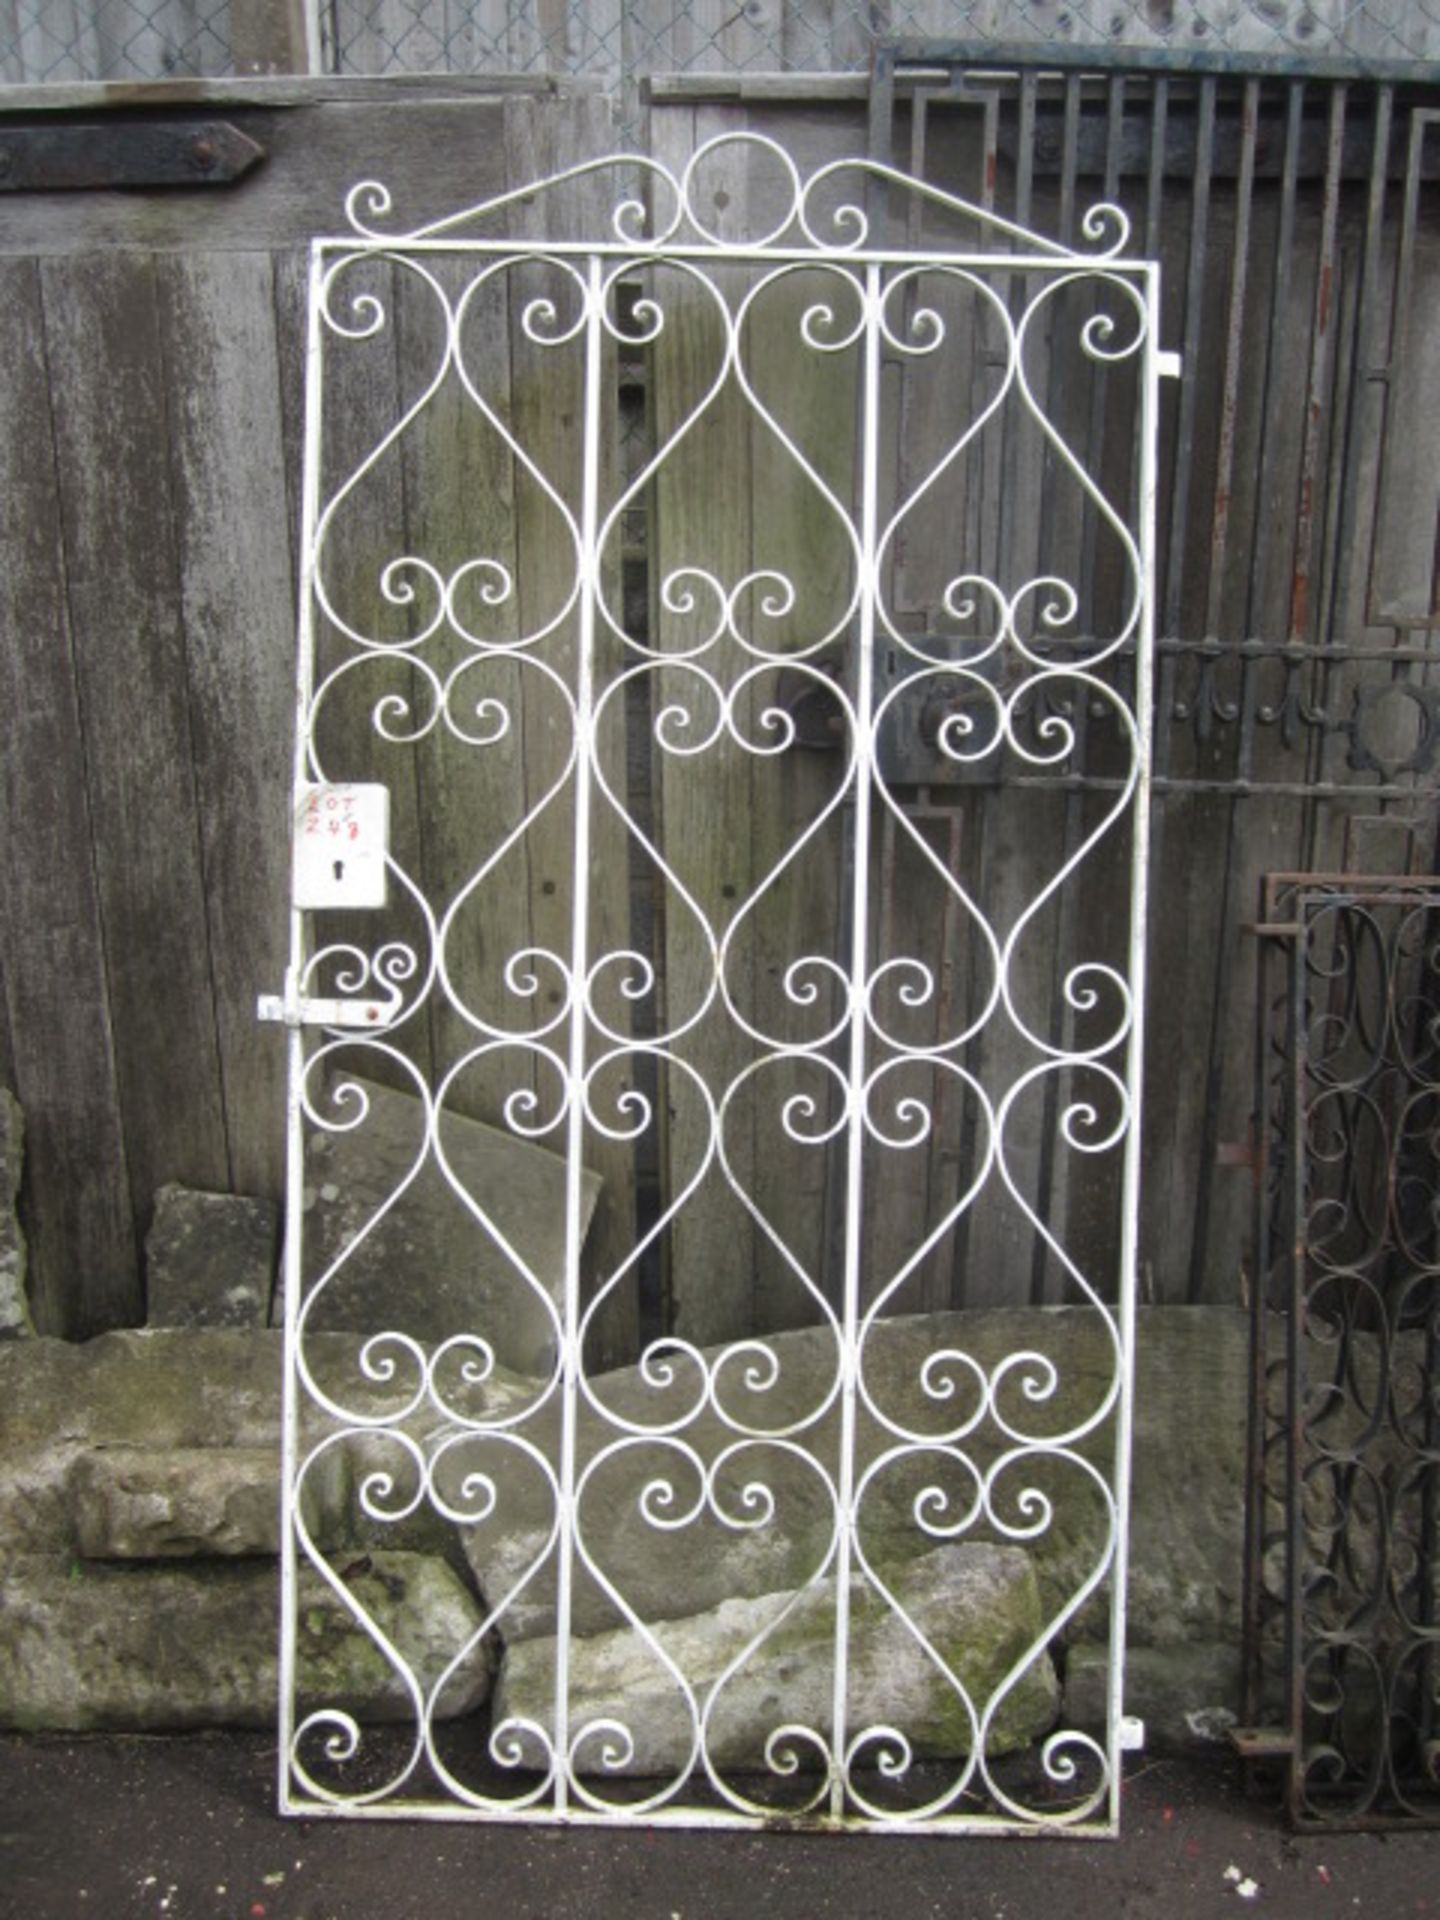 Reclaimed metal ornate single gates, approx. size width: 39" x height: 75".